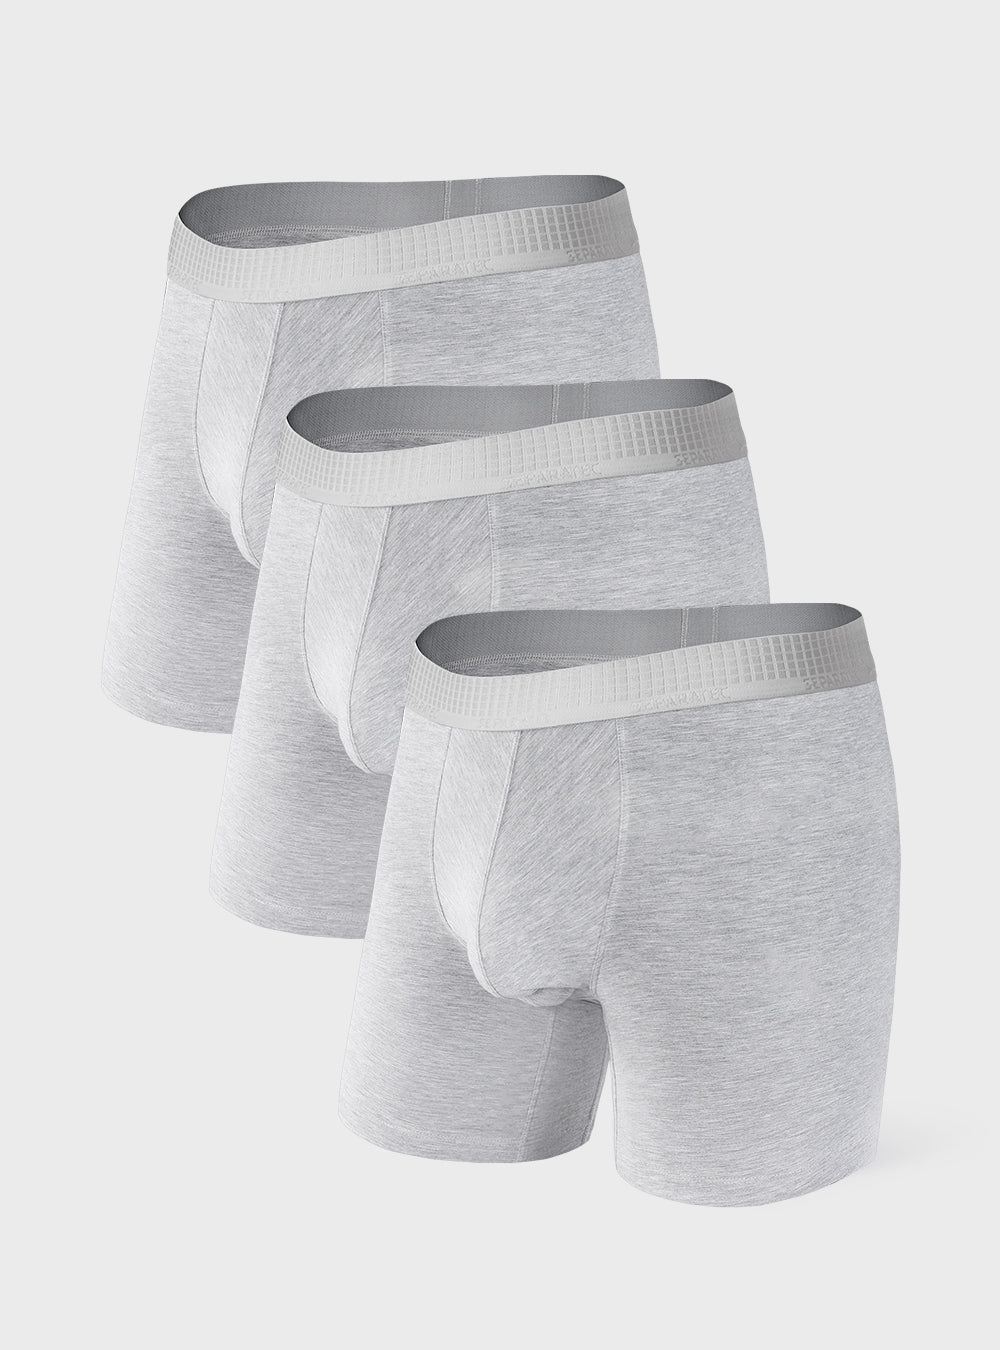 SuperSoft Micromodal Boxer Briefs 3 Pack